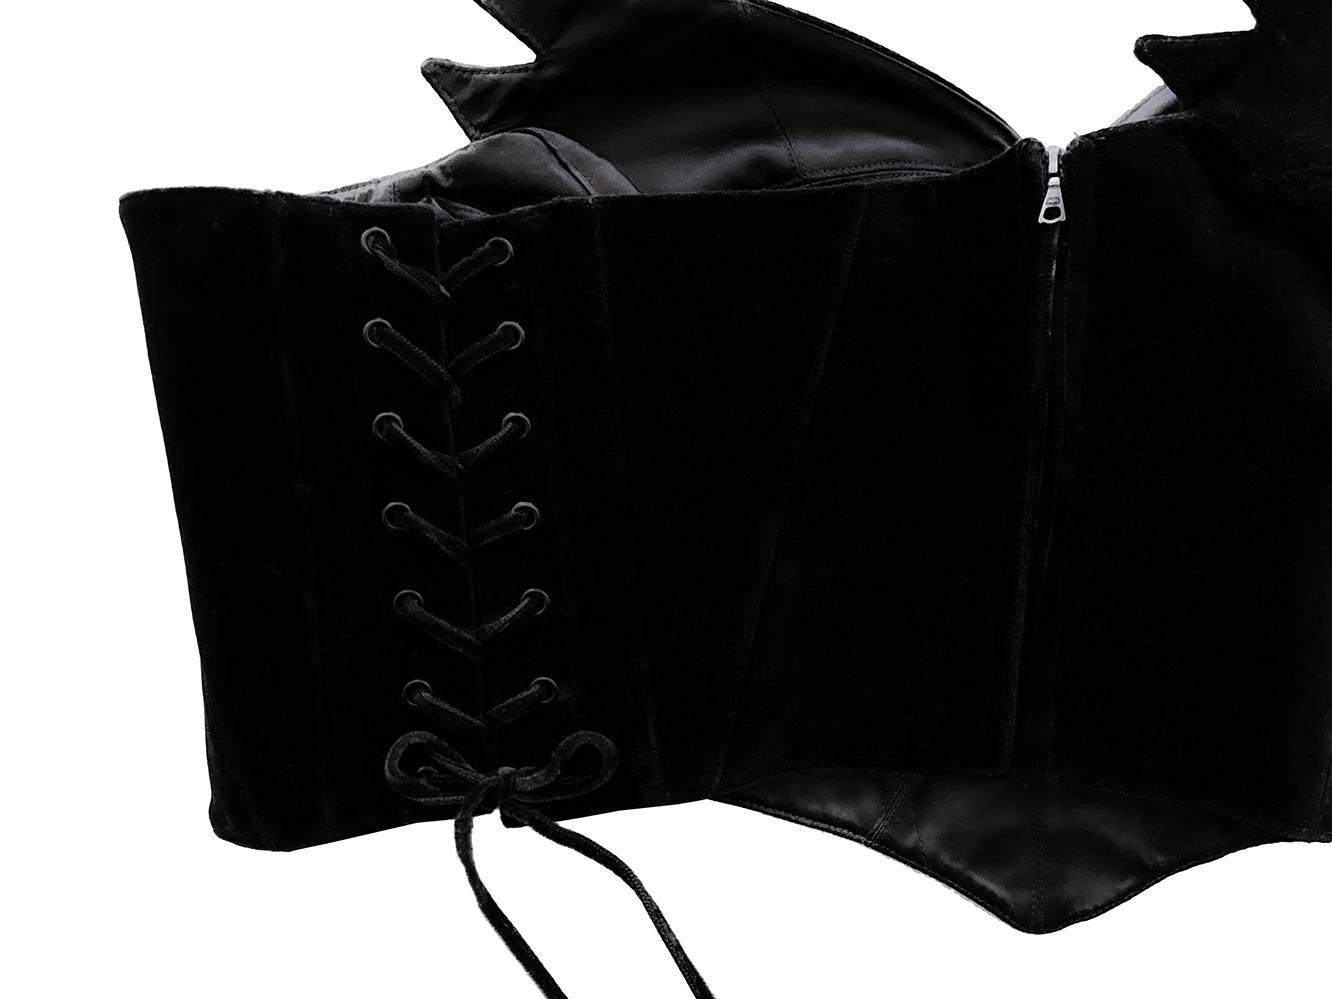 Iconic Thierry Mugler Black Velvet Bustier Top Dramatic Winged Corset For Sale 2